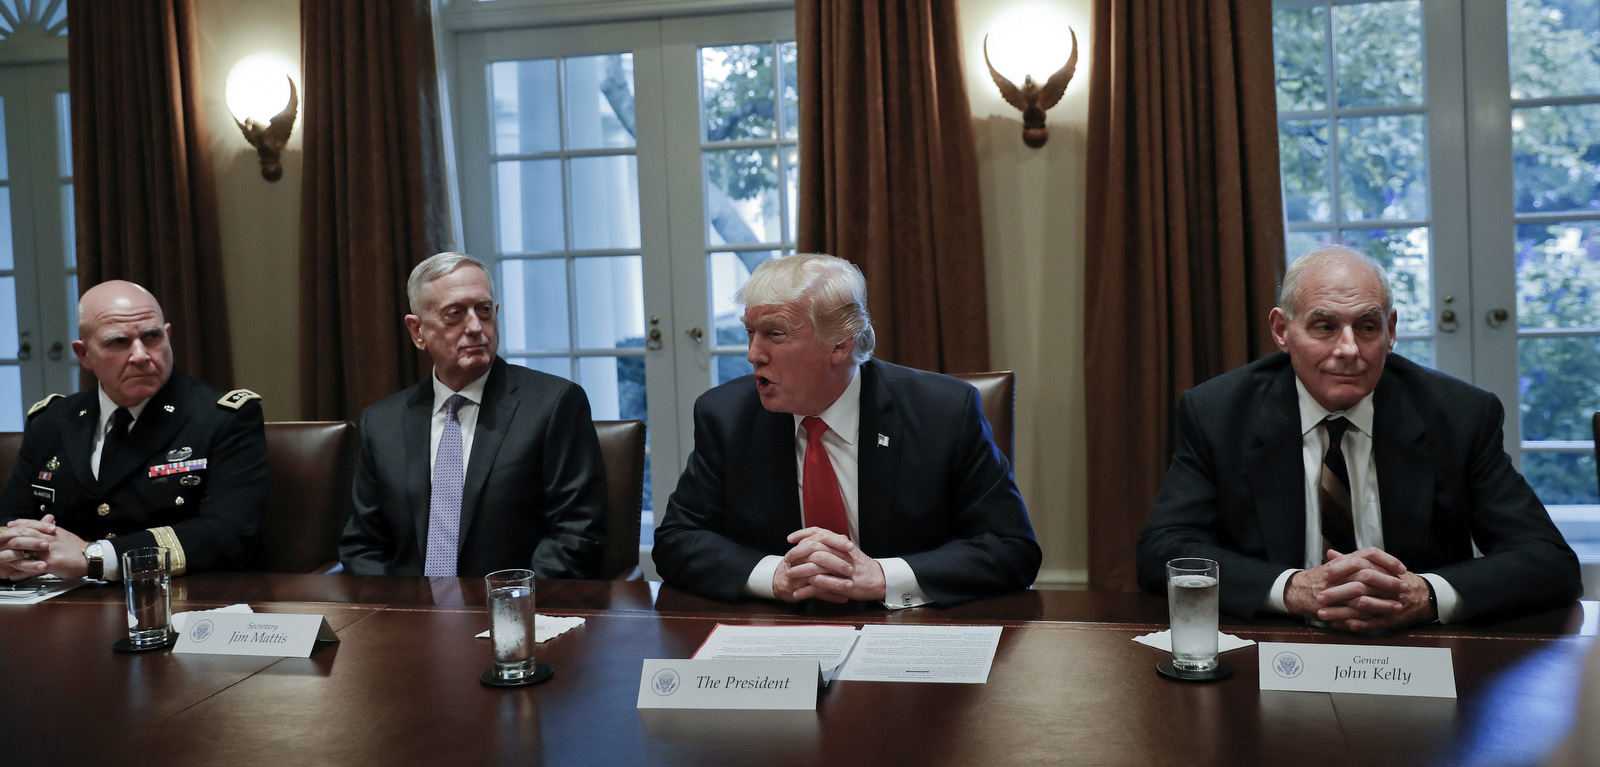 President Donald Trump speaks during a briefing with senior military leaders in the Cabinet Room of the White House in Washington, Oct. 5, 2017. Sitting with Trump from left, National Security Adviser H.R. McMaster, Defense Secretary Jim Mattis, and White House Chief of Staff General John Kelly. (AP/Pablo Martinez Monsivais)